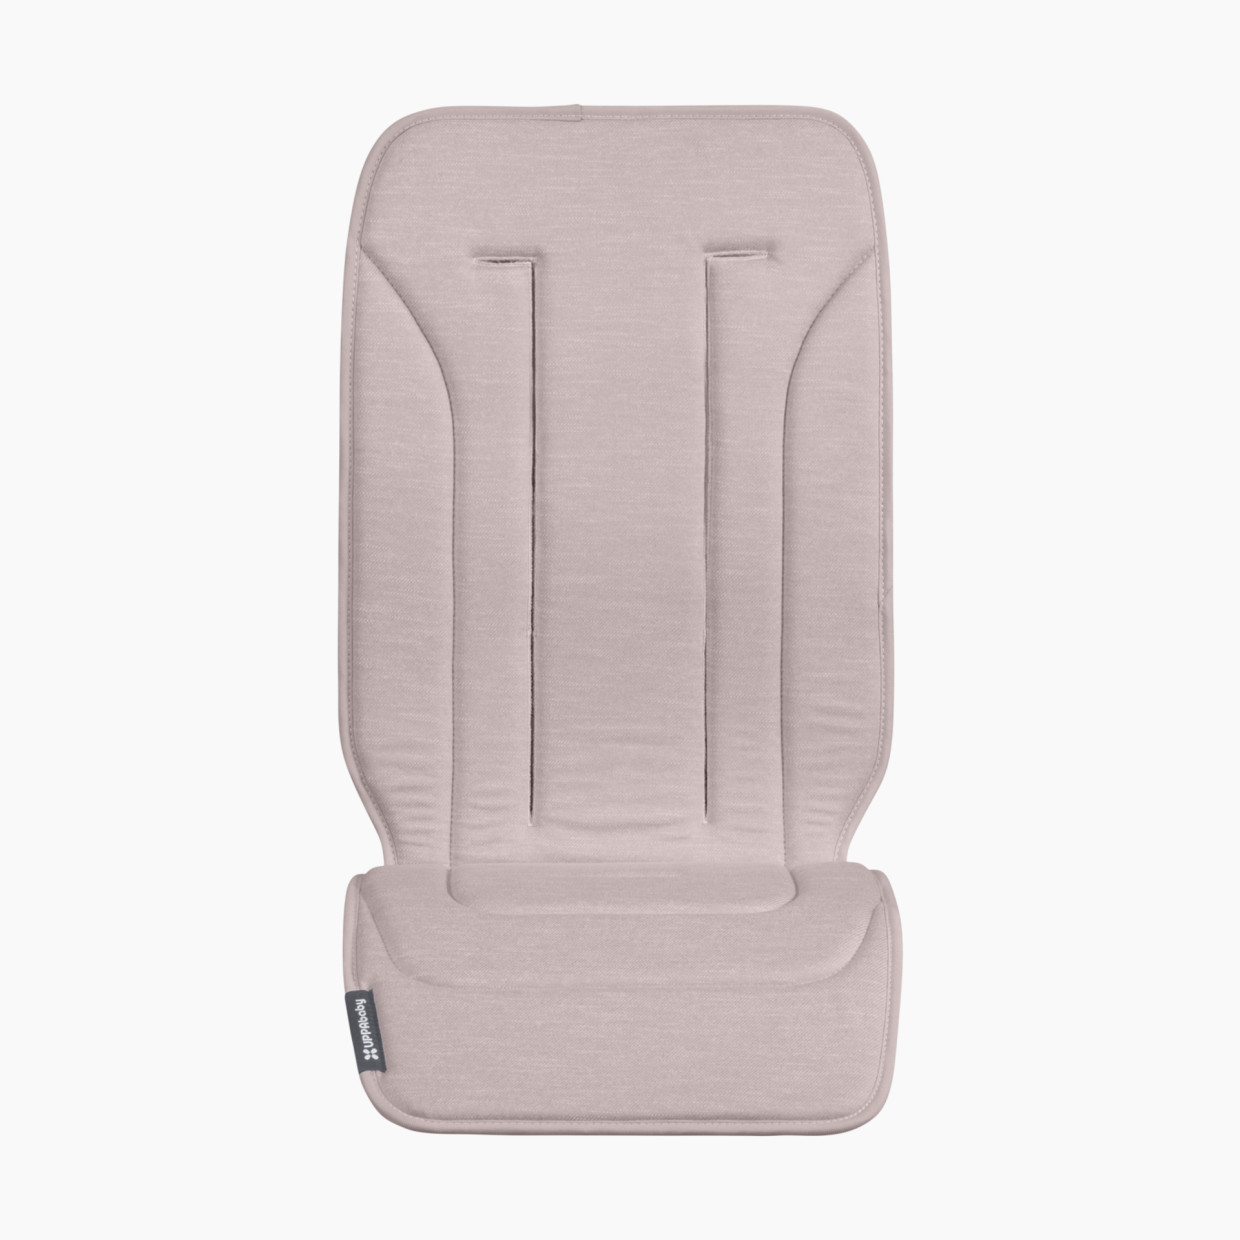 UPPAbaby Reversible Seat Liner - Alice.